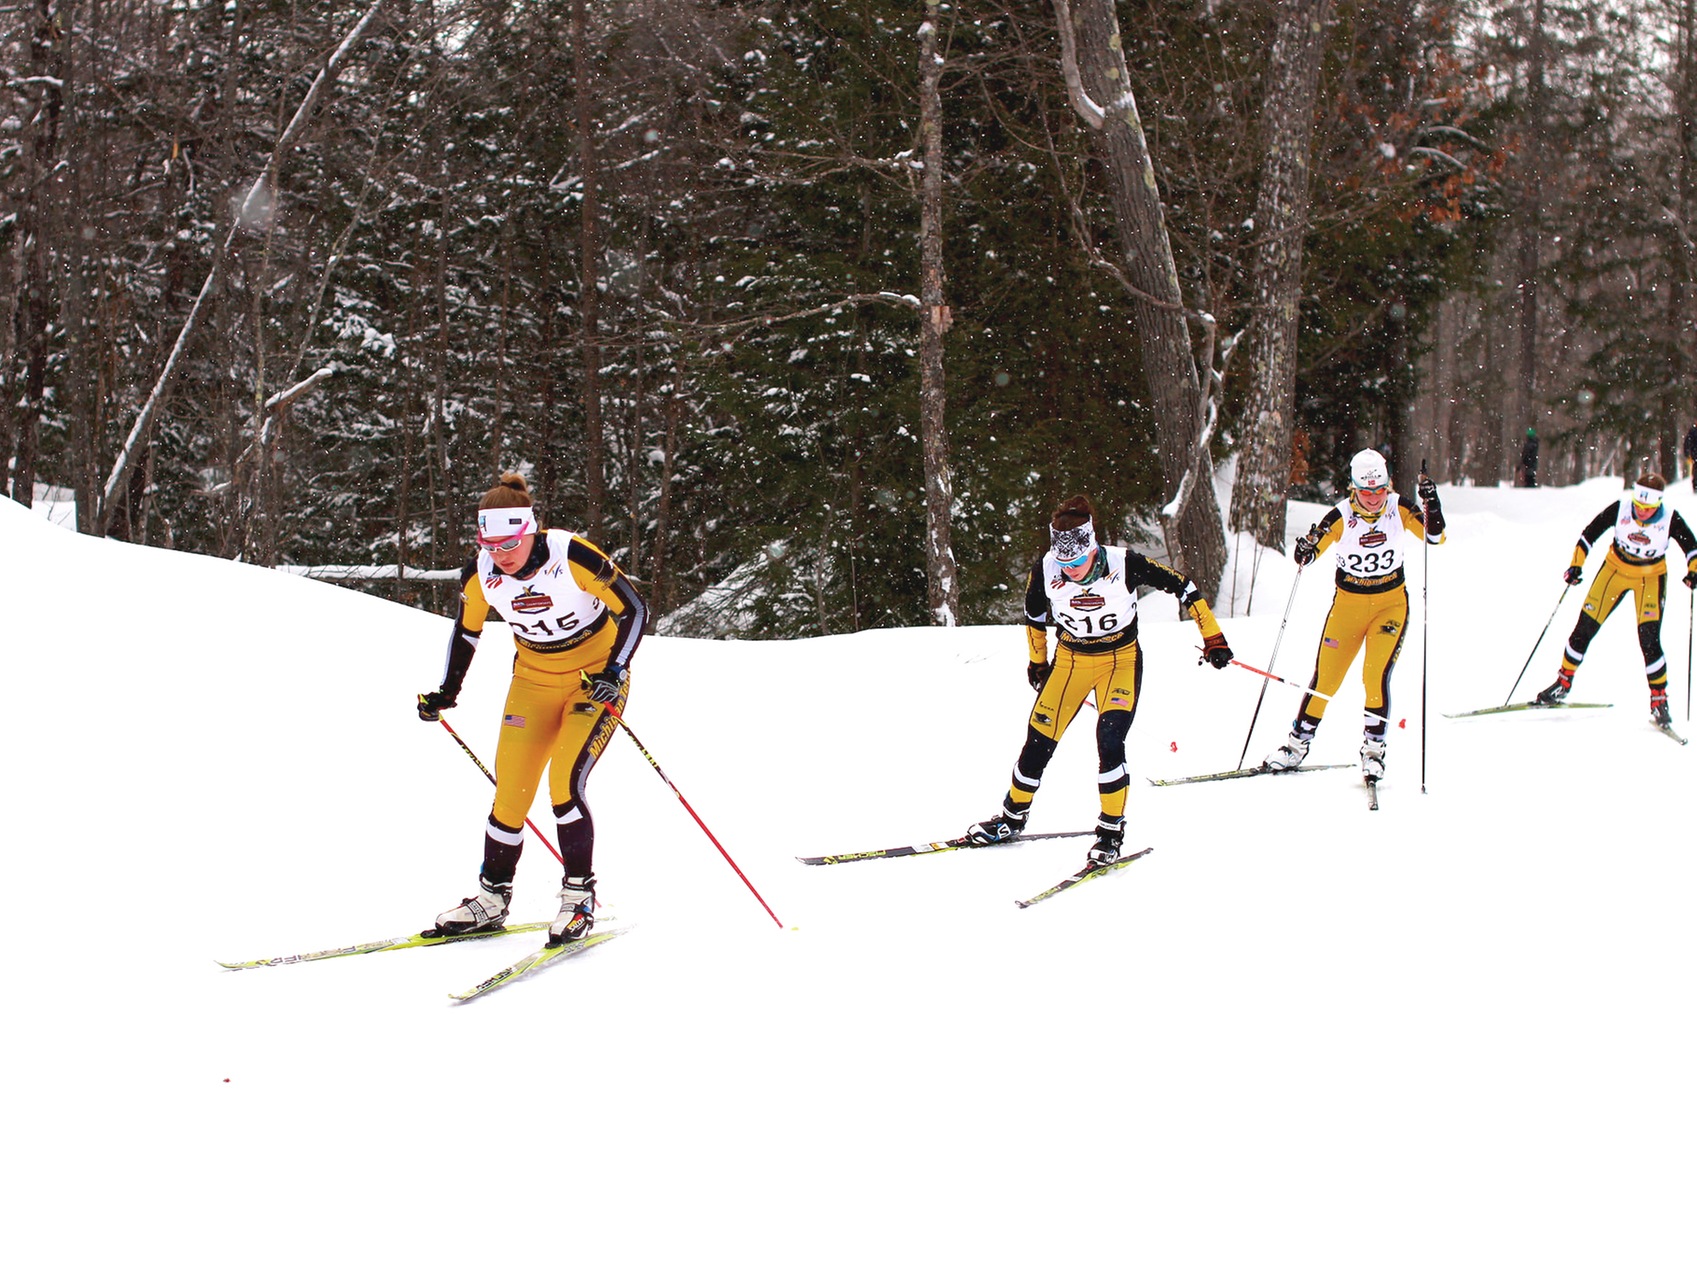 Huskies Top Competition for Second Place in Classic Ski Race